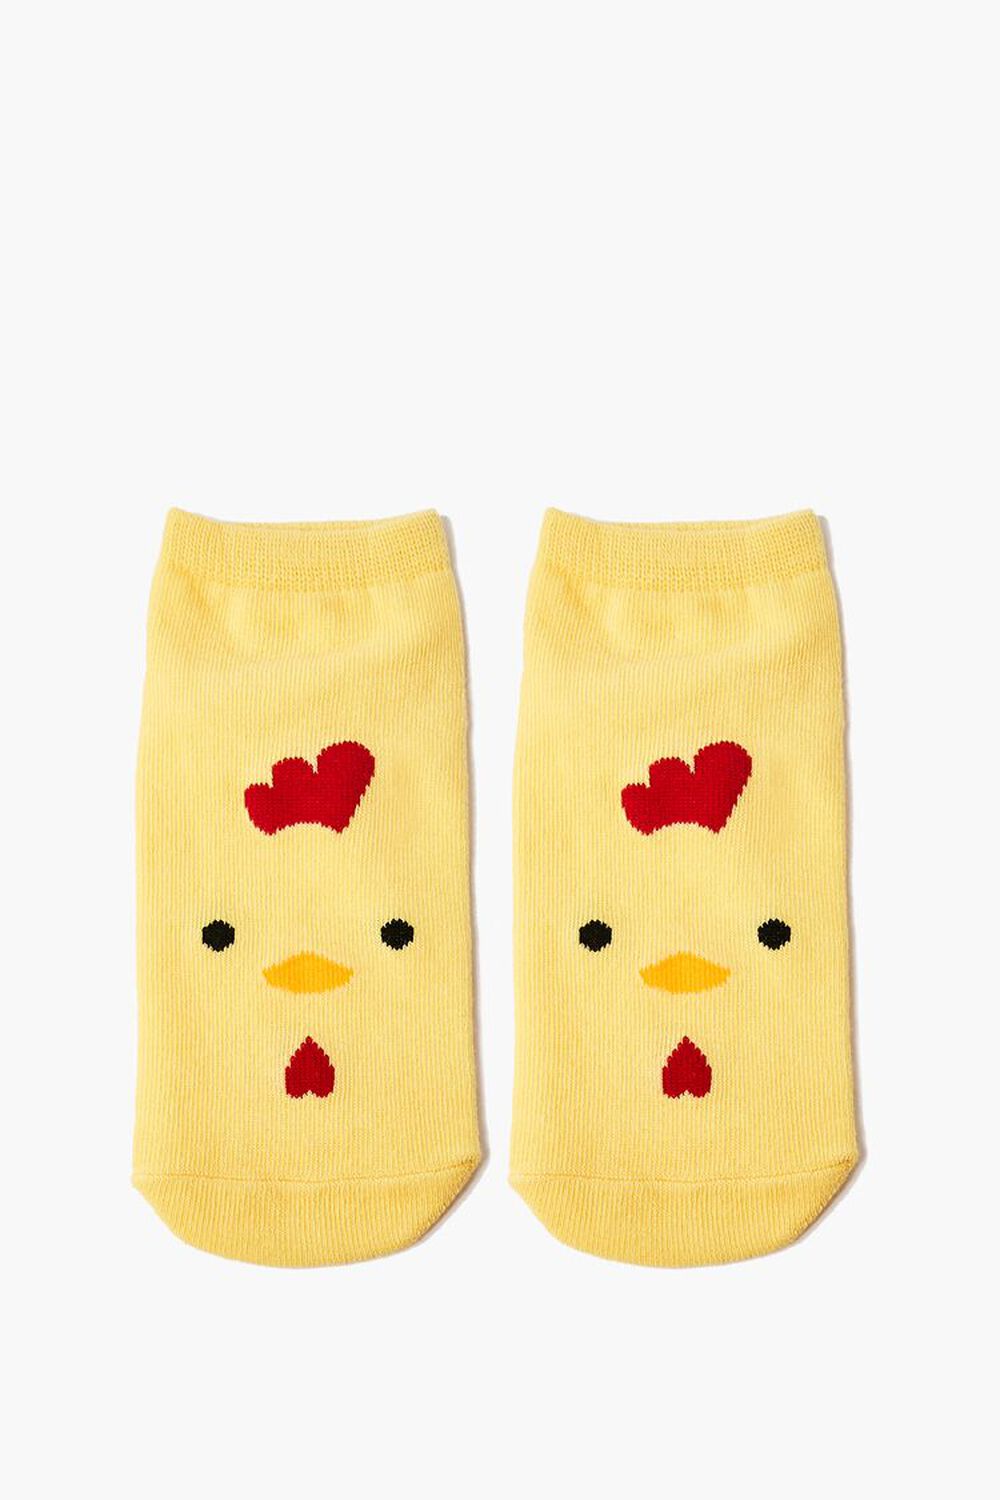 YELLOW/MULTI Chicken Graphic Ankle Socks, image 1